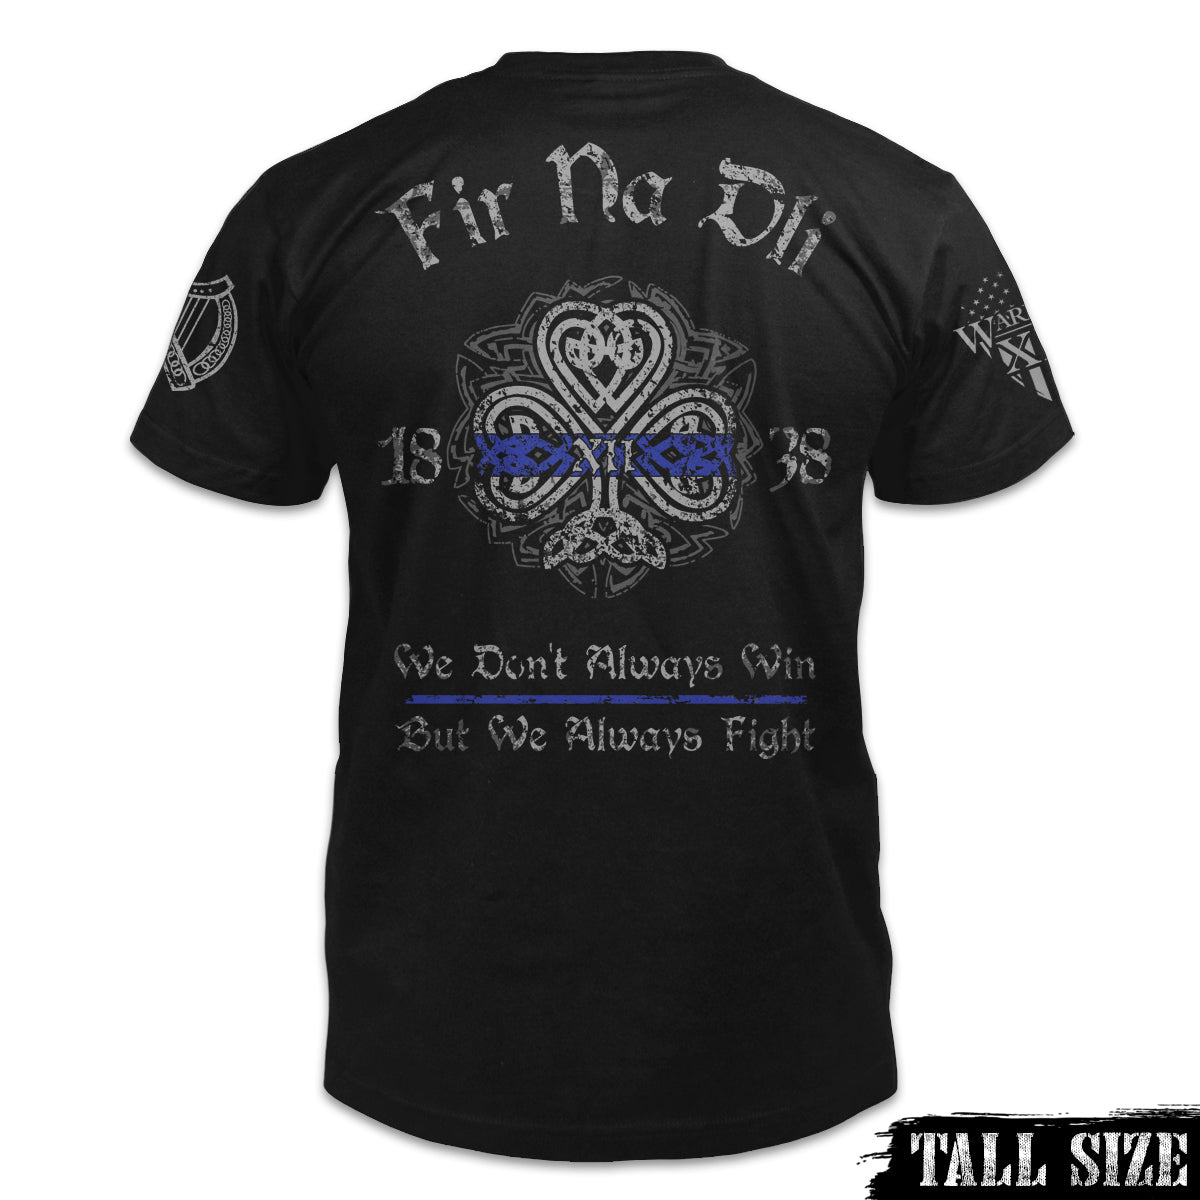 A black tall size shirt paying tribute to history and traditions of Irish American Law Enforcement and showing true Celtic Pride. Fir Na Dli, meaning, men of law‚ in Gaelic, is written across the back of the shirt.